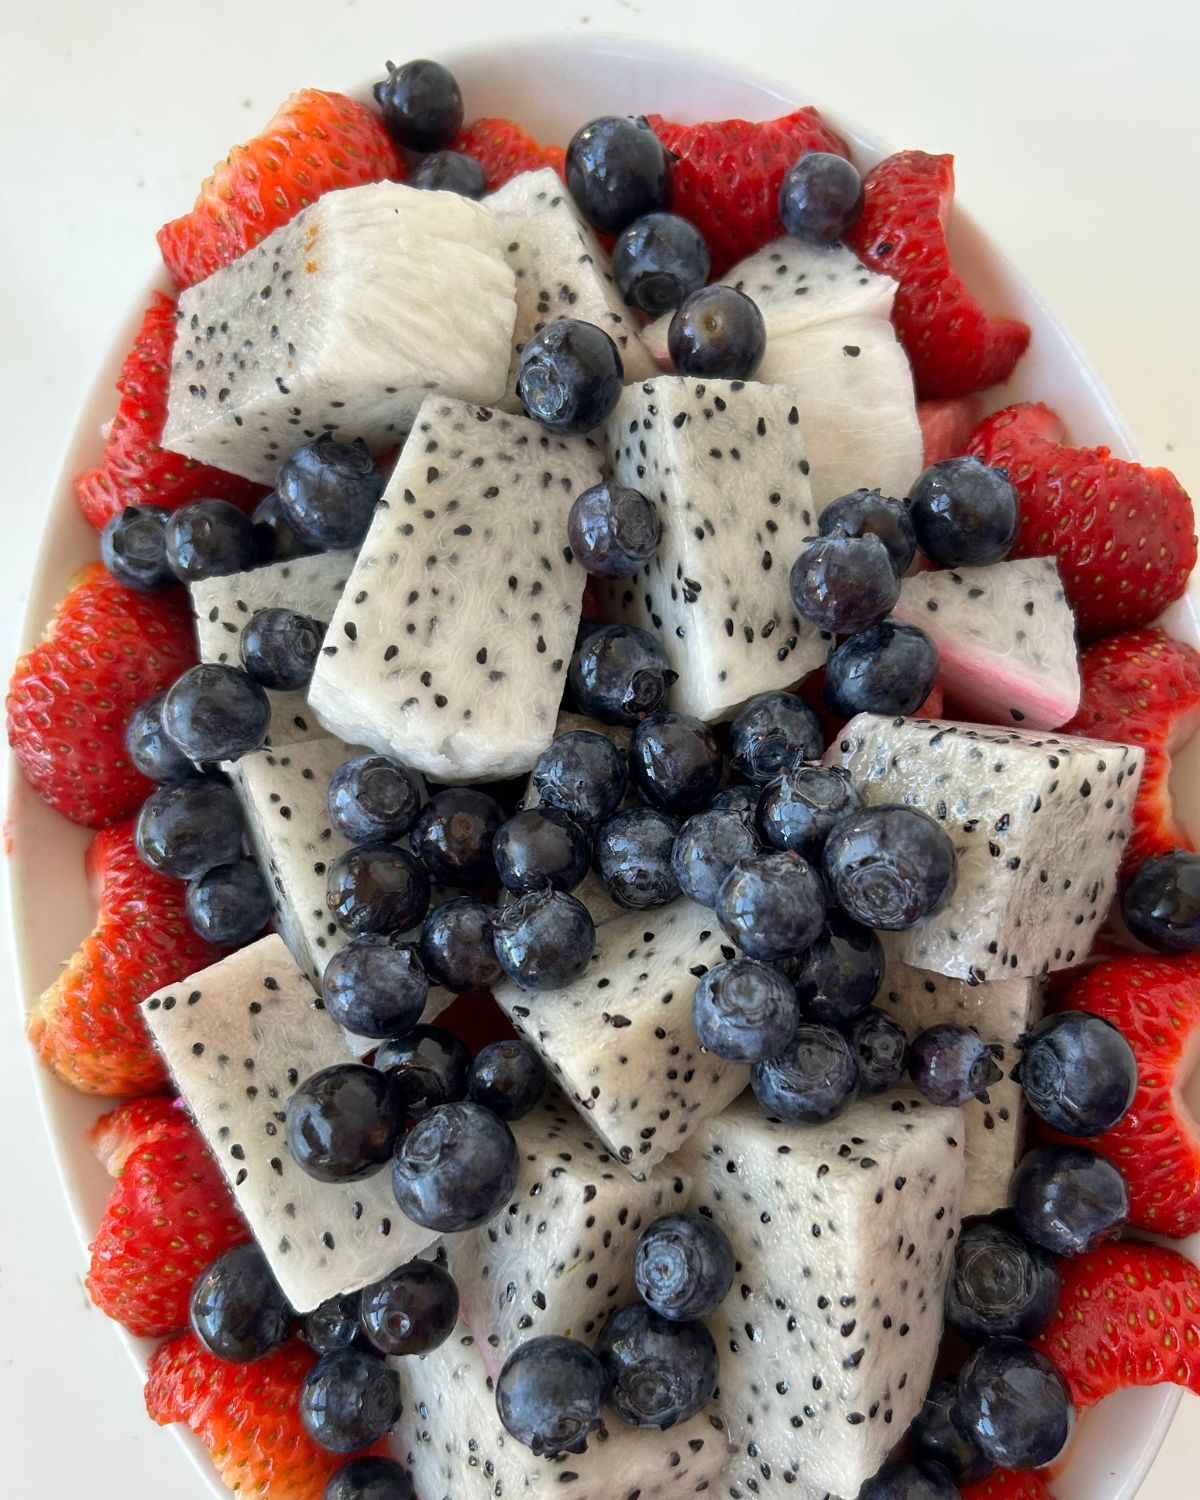 Dragon Fruit Salad with Watermelon, Strawberries, and Blueberries - Nut Free Wok